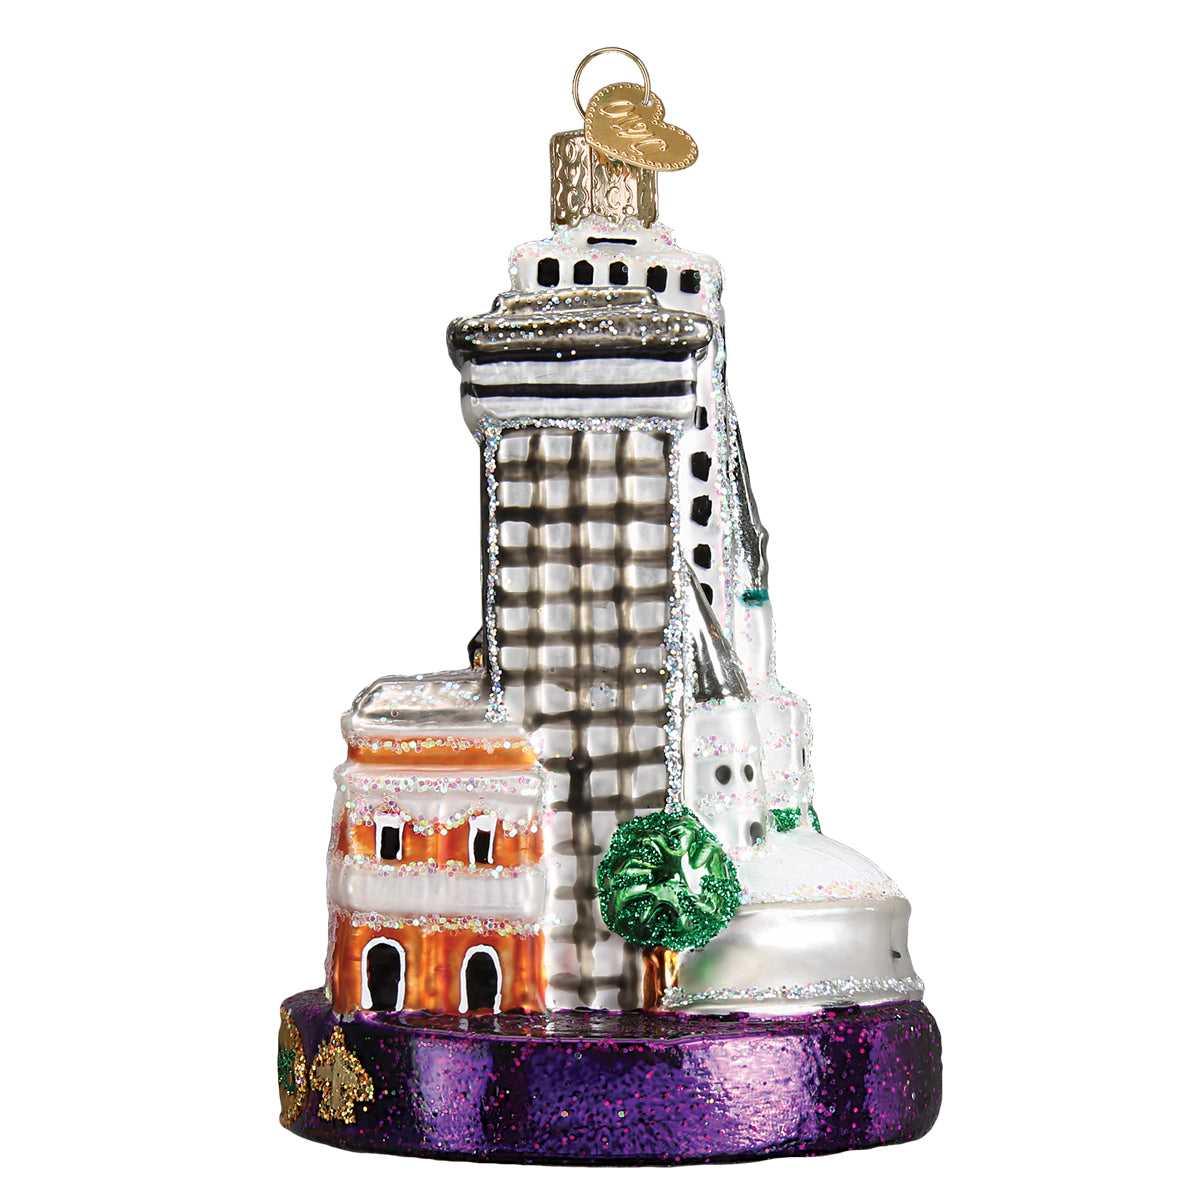 New Orleans Ornament